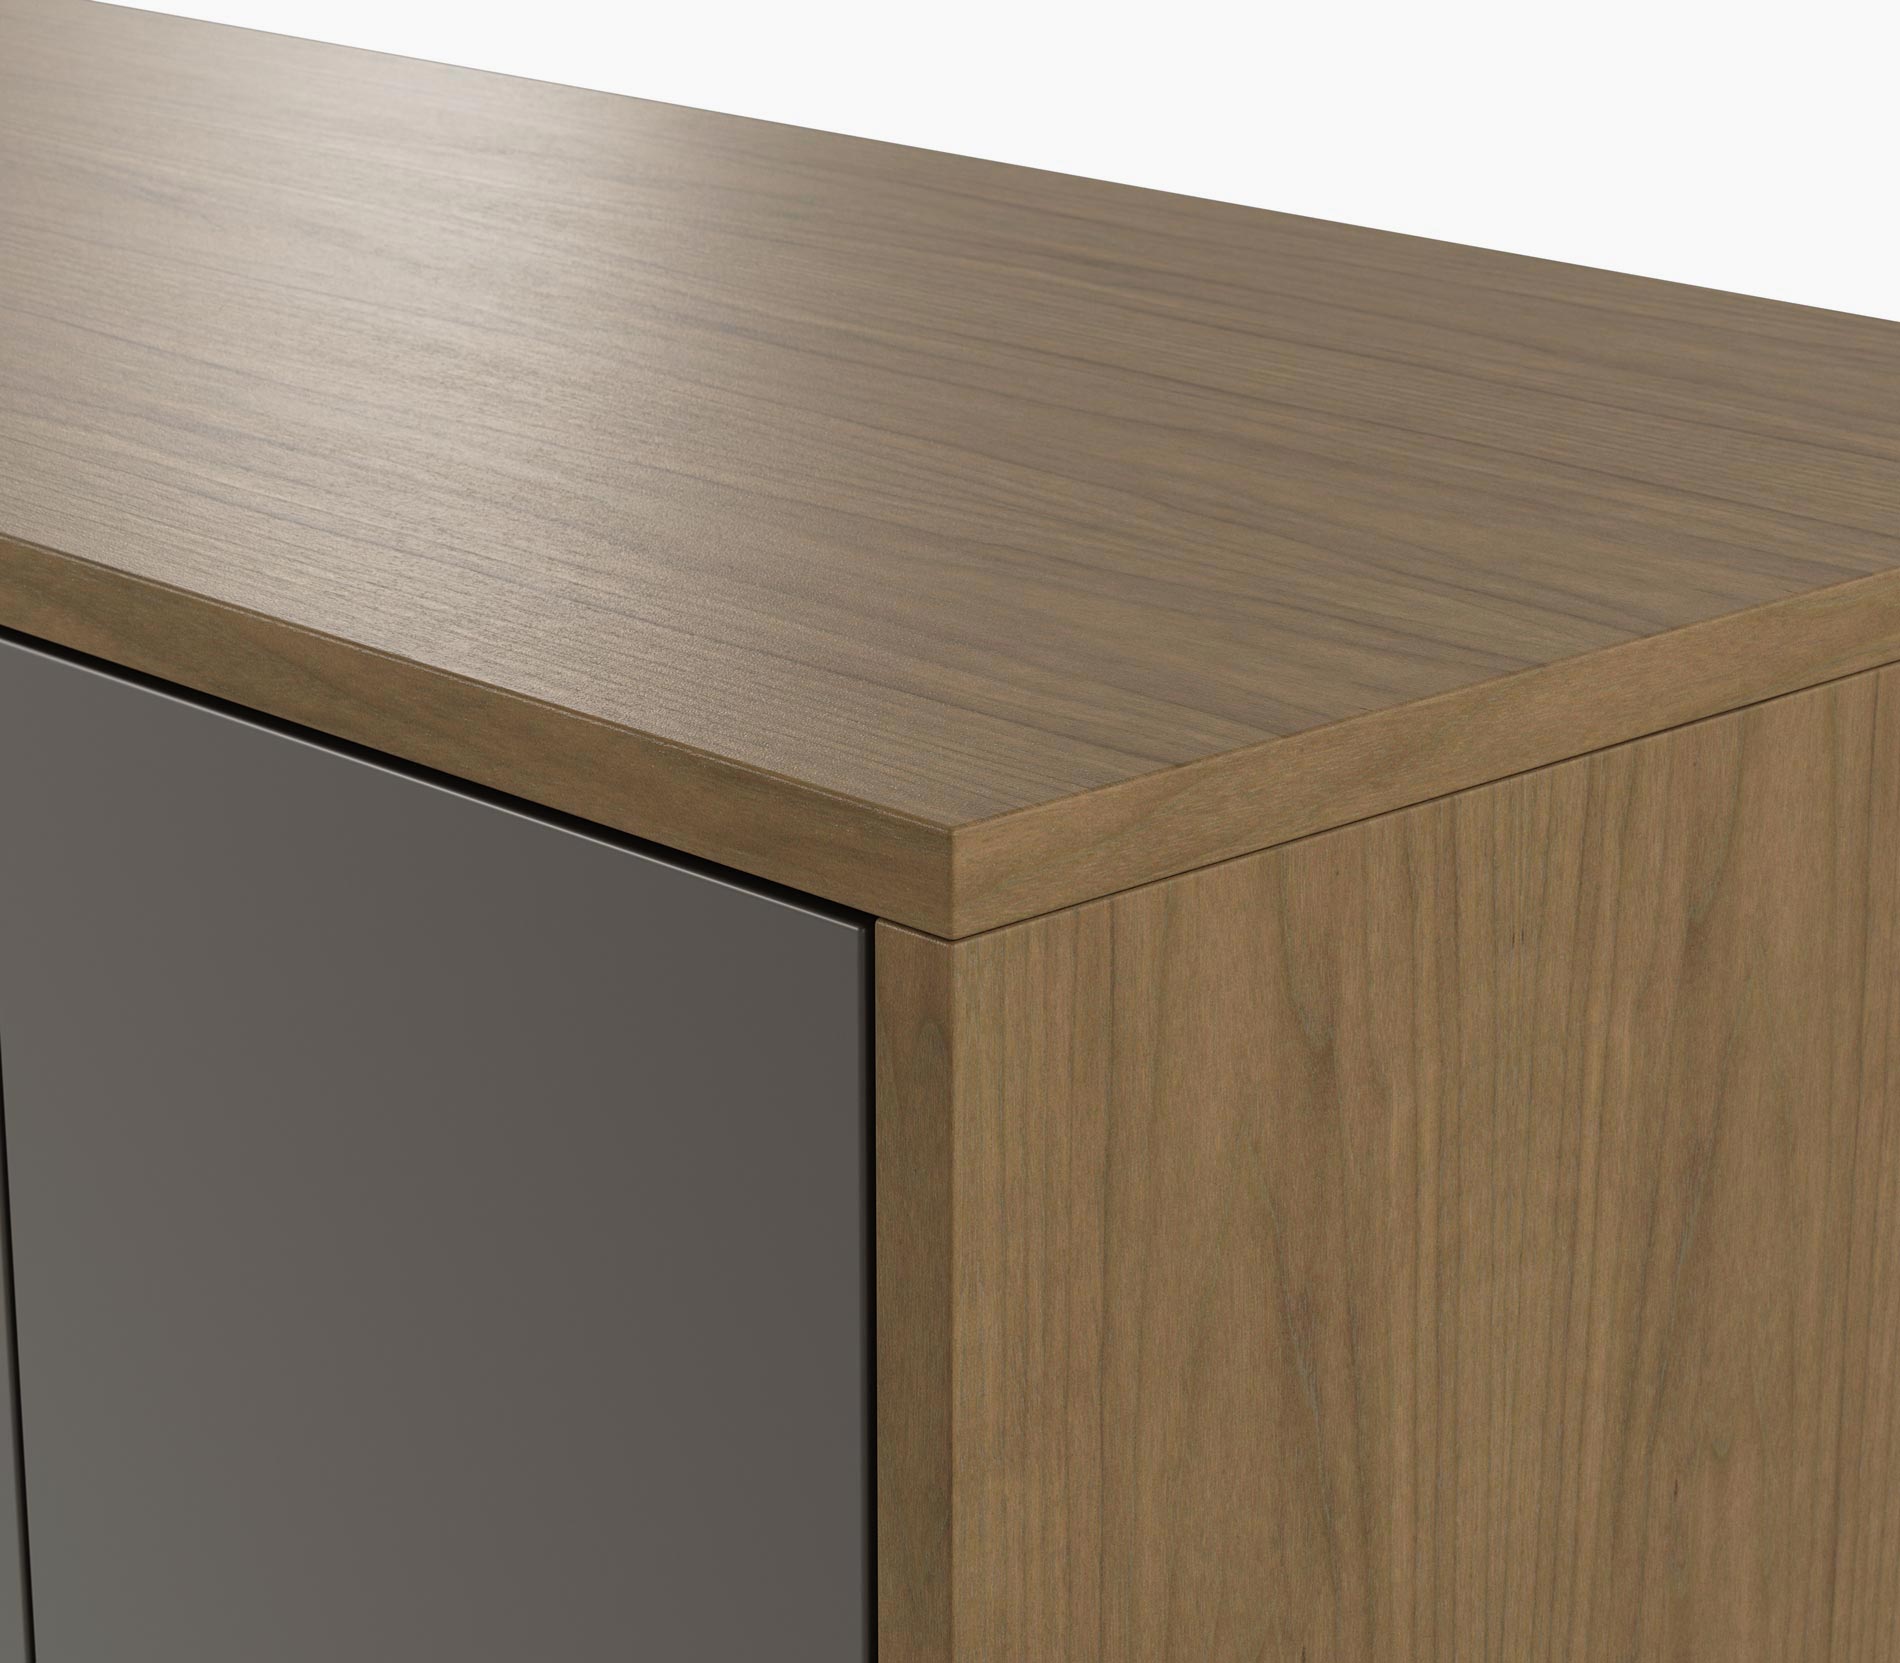 Edge detail on a Highline Twenty Five Credenza in natural flat cut walnut with a grey  painted front